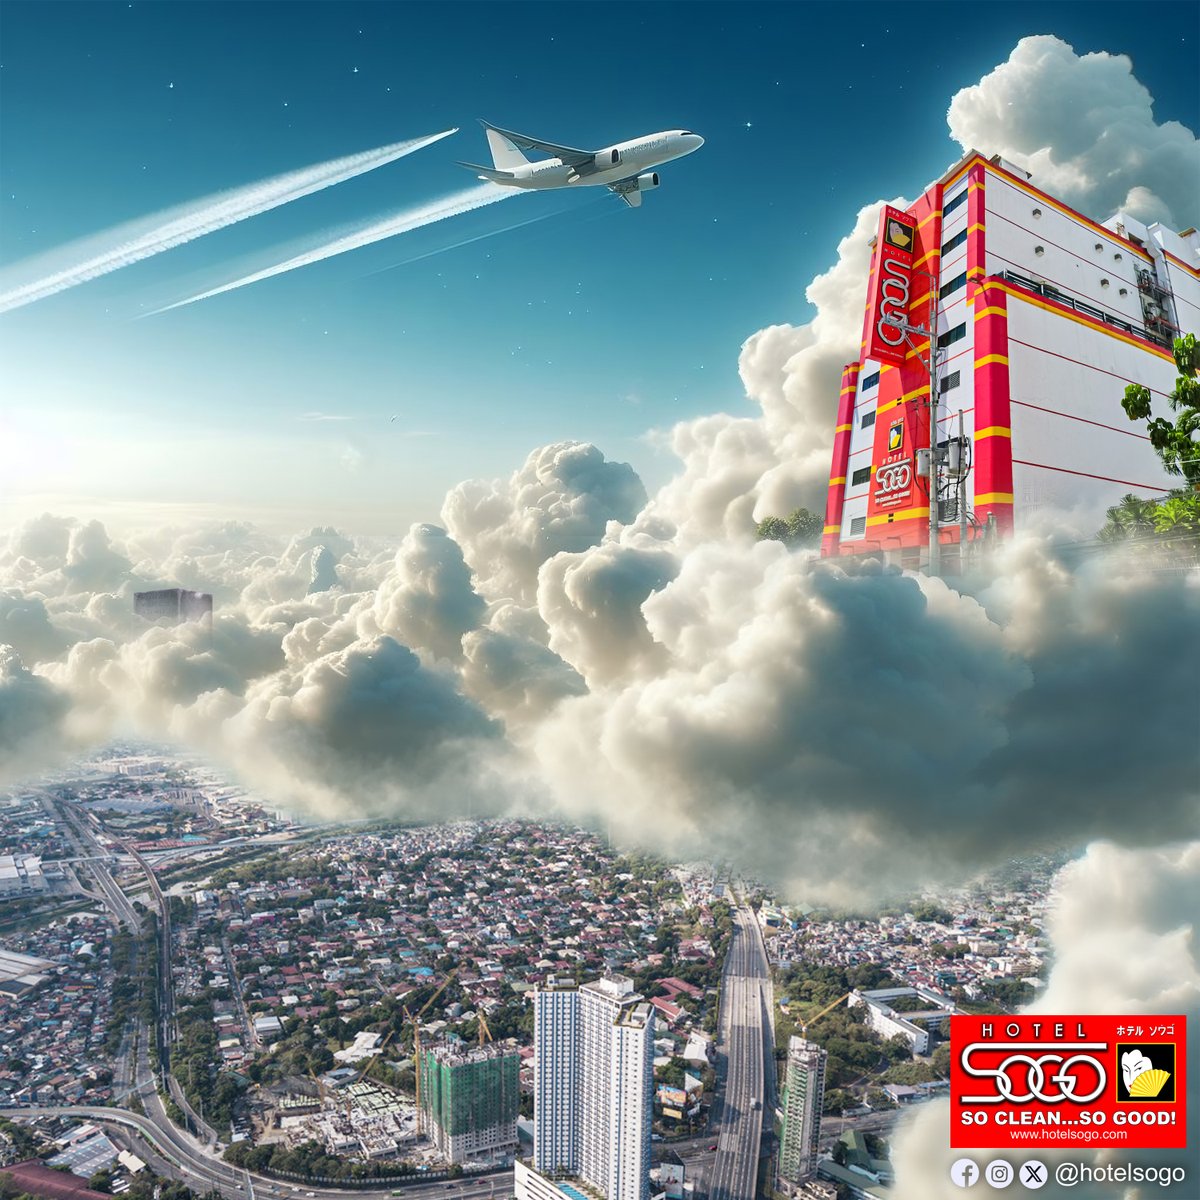 Reach new heights of imagination and let your dreams take flight and soar to endless possibilities. Welcome to Hotel Sogo. The future of hotel stays is here.

#HotelSogo
#HereAtHotelSogo
#SoCleanSoGood
#DahilMahalKitaGustoKoSaSogoKa